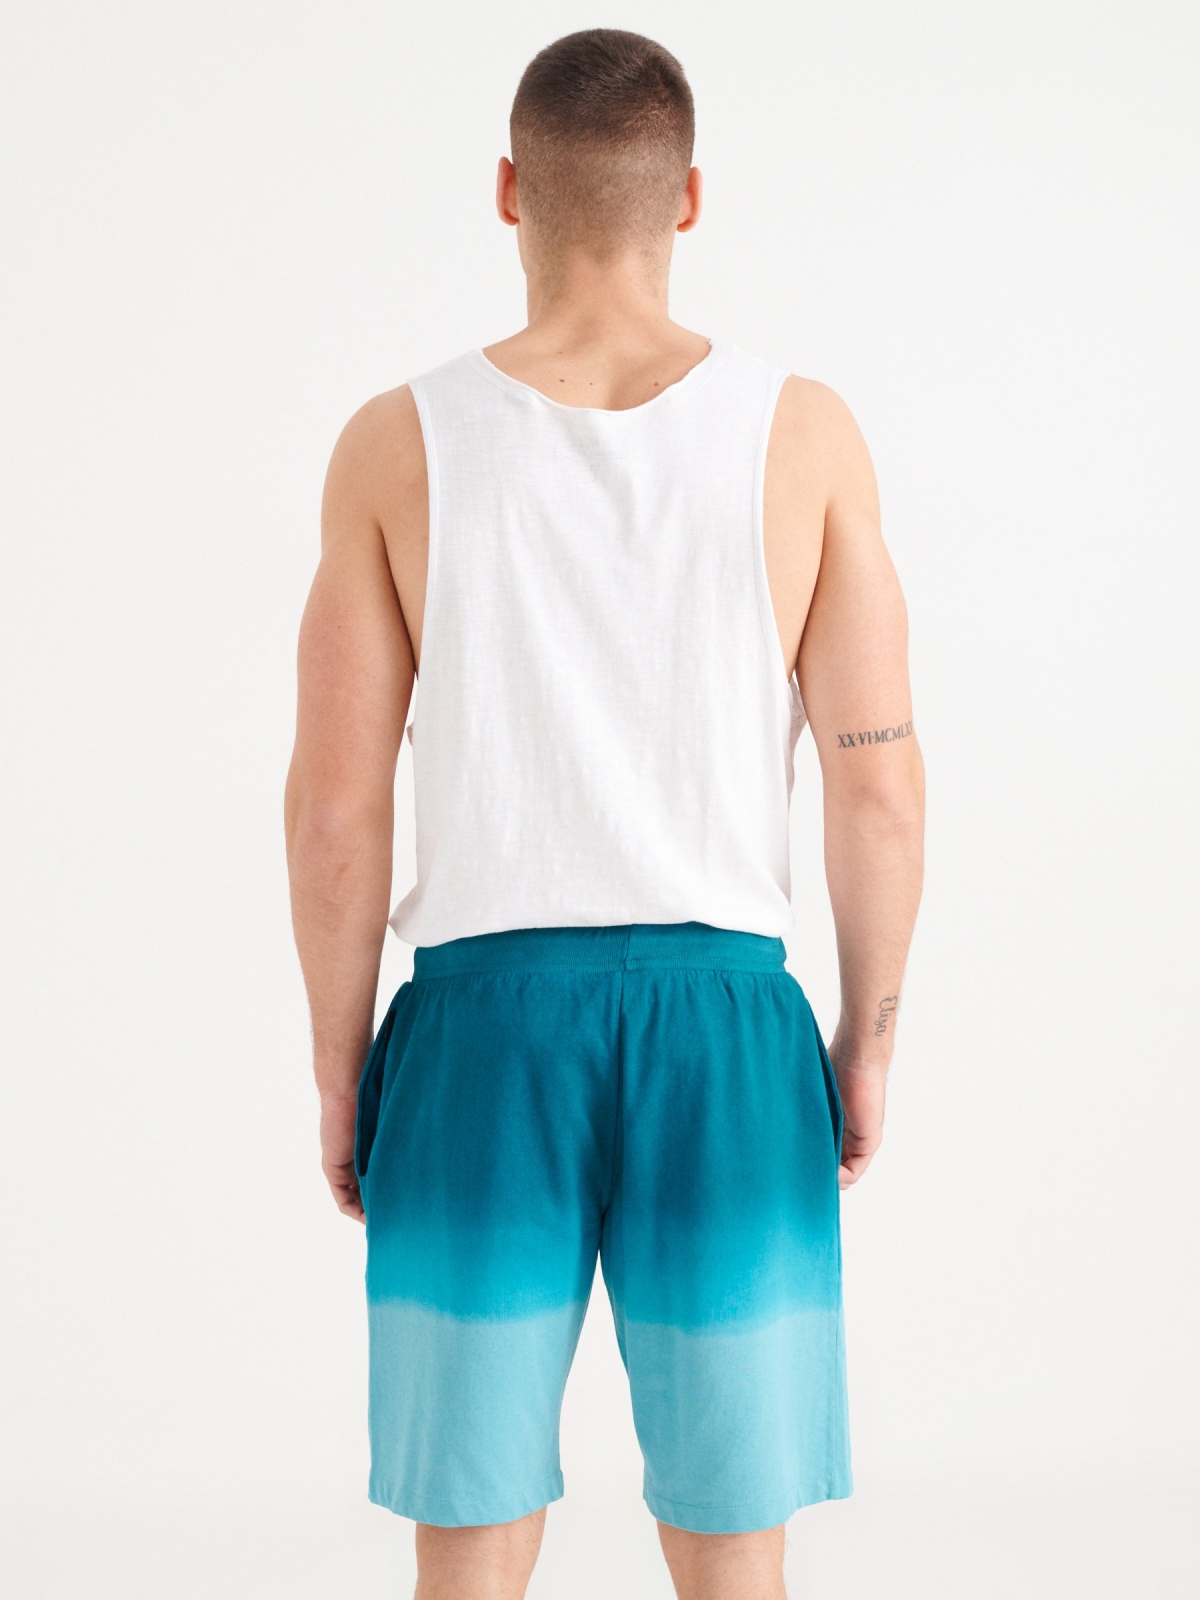 Gradient effect Bermuda shorts blue middle back view